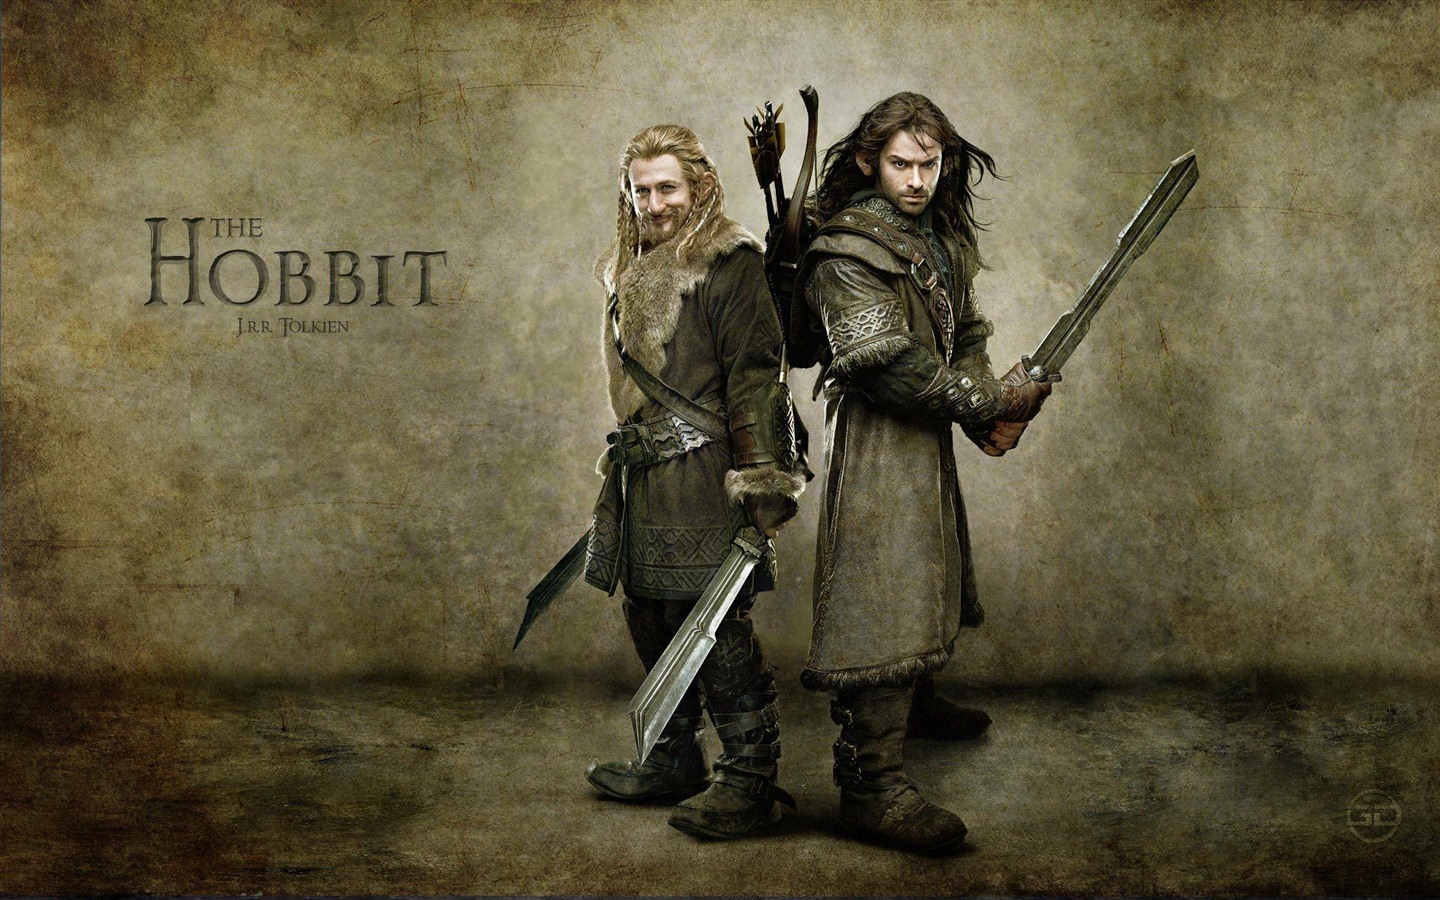 The Hobbit: An Unexpected Journey HD wallpapers #8 - 1440x900